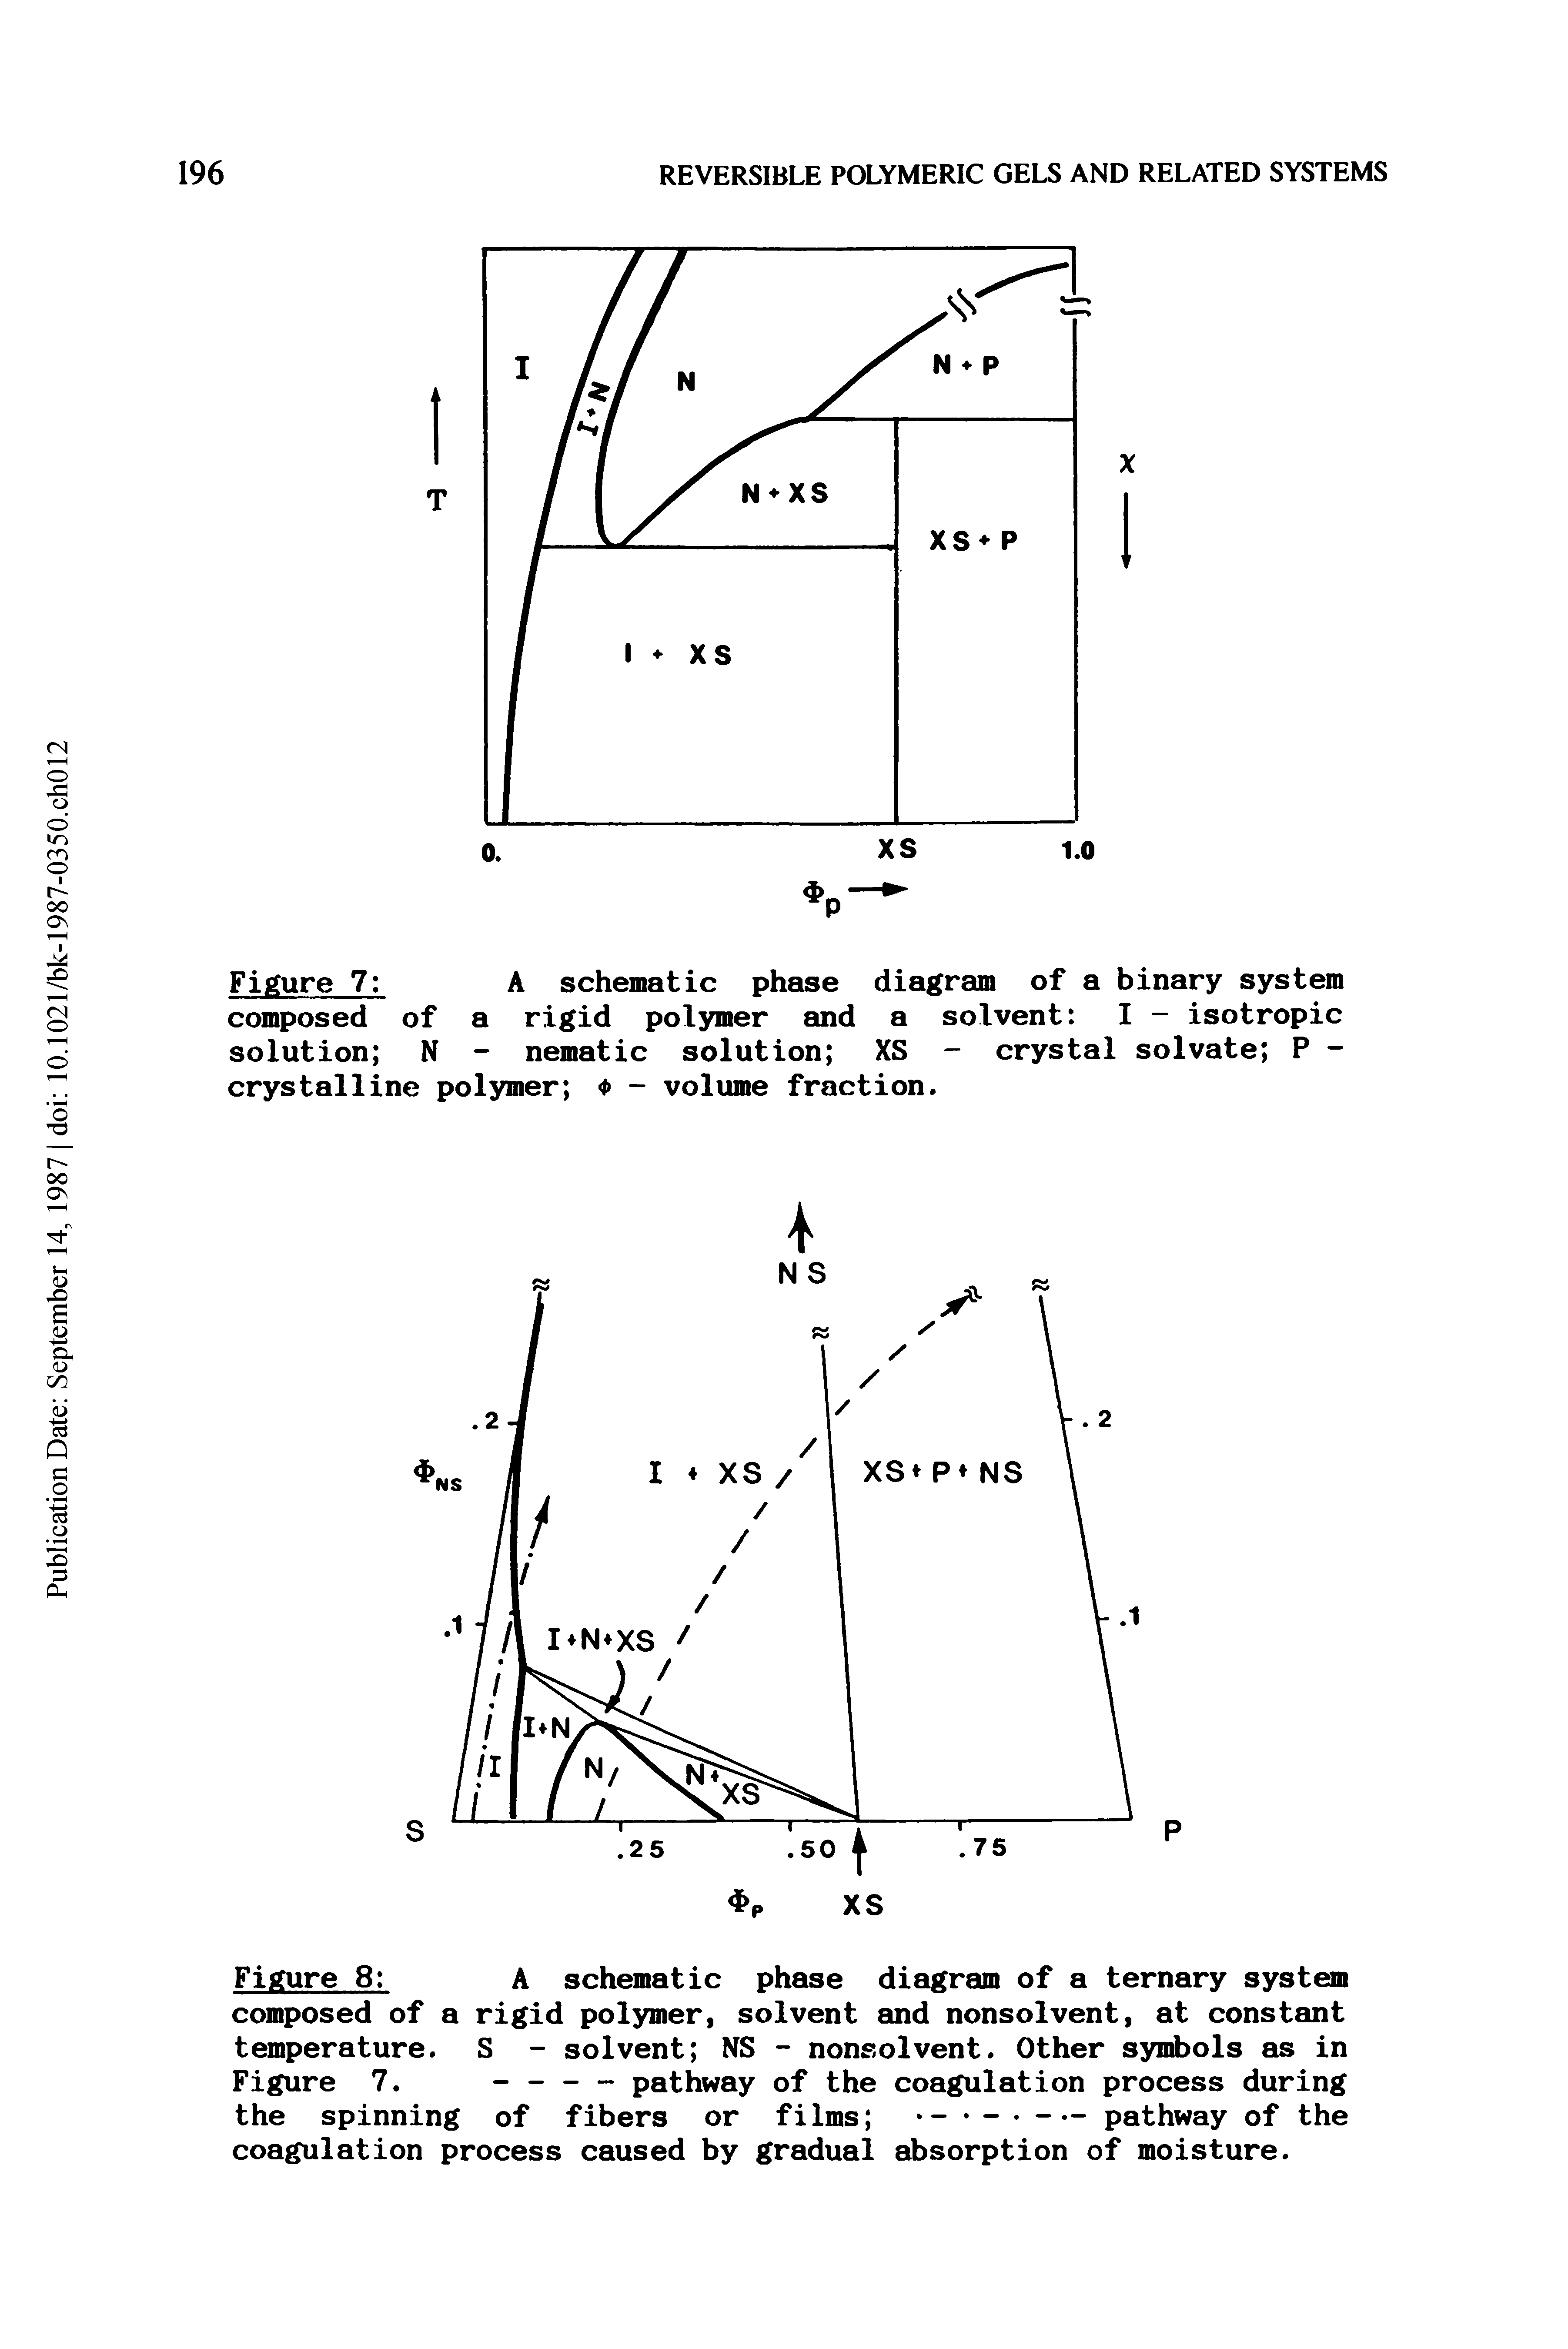 Figure 8 A schematic phase diagram of a ternary system...